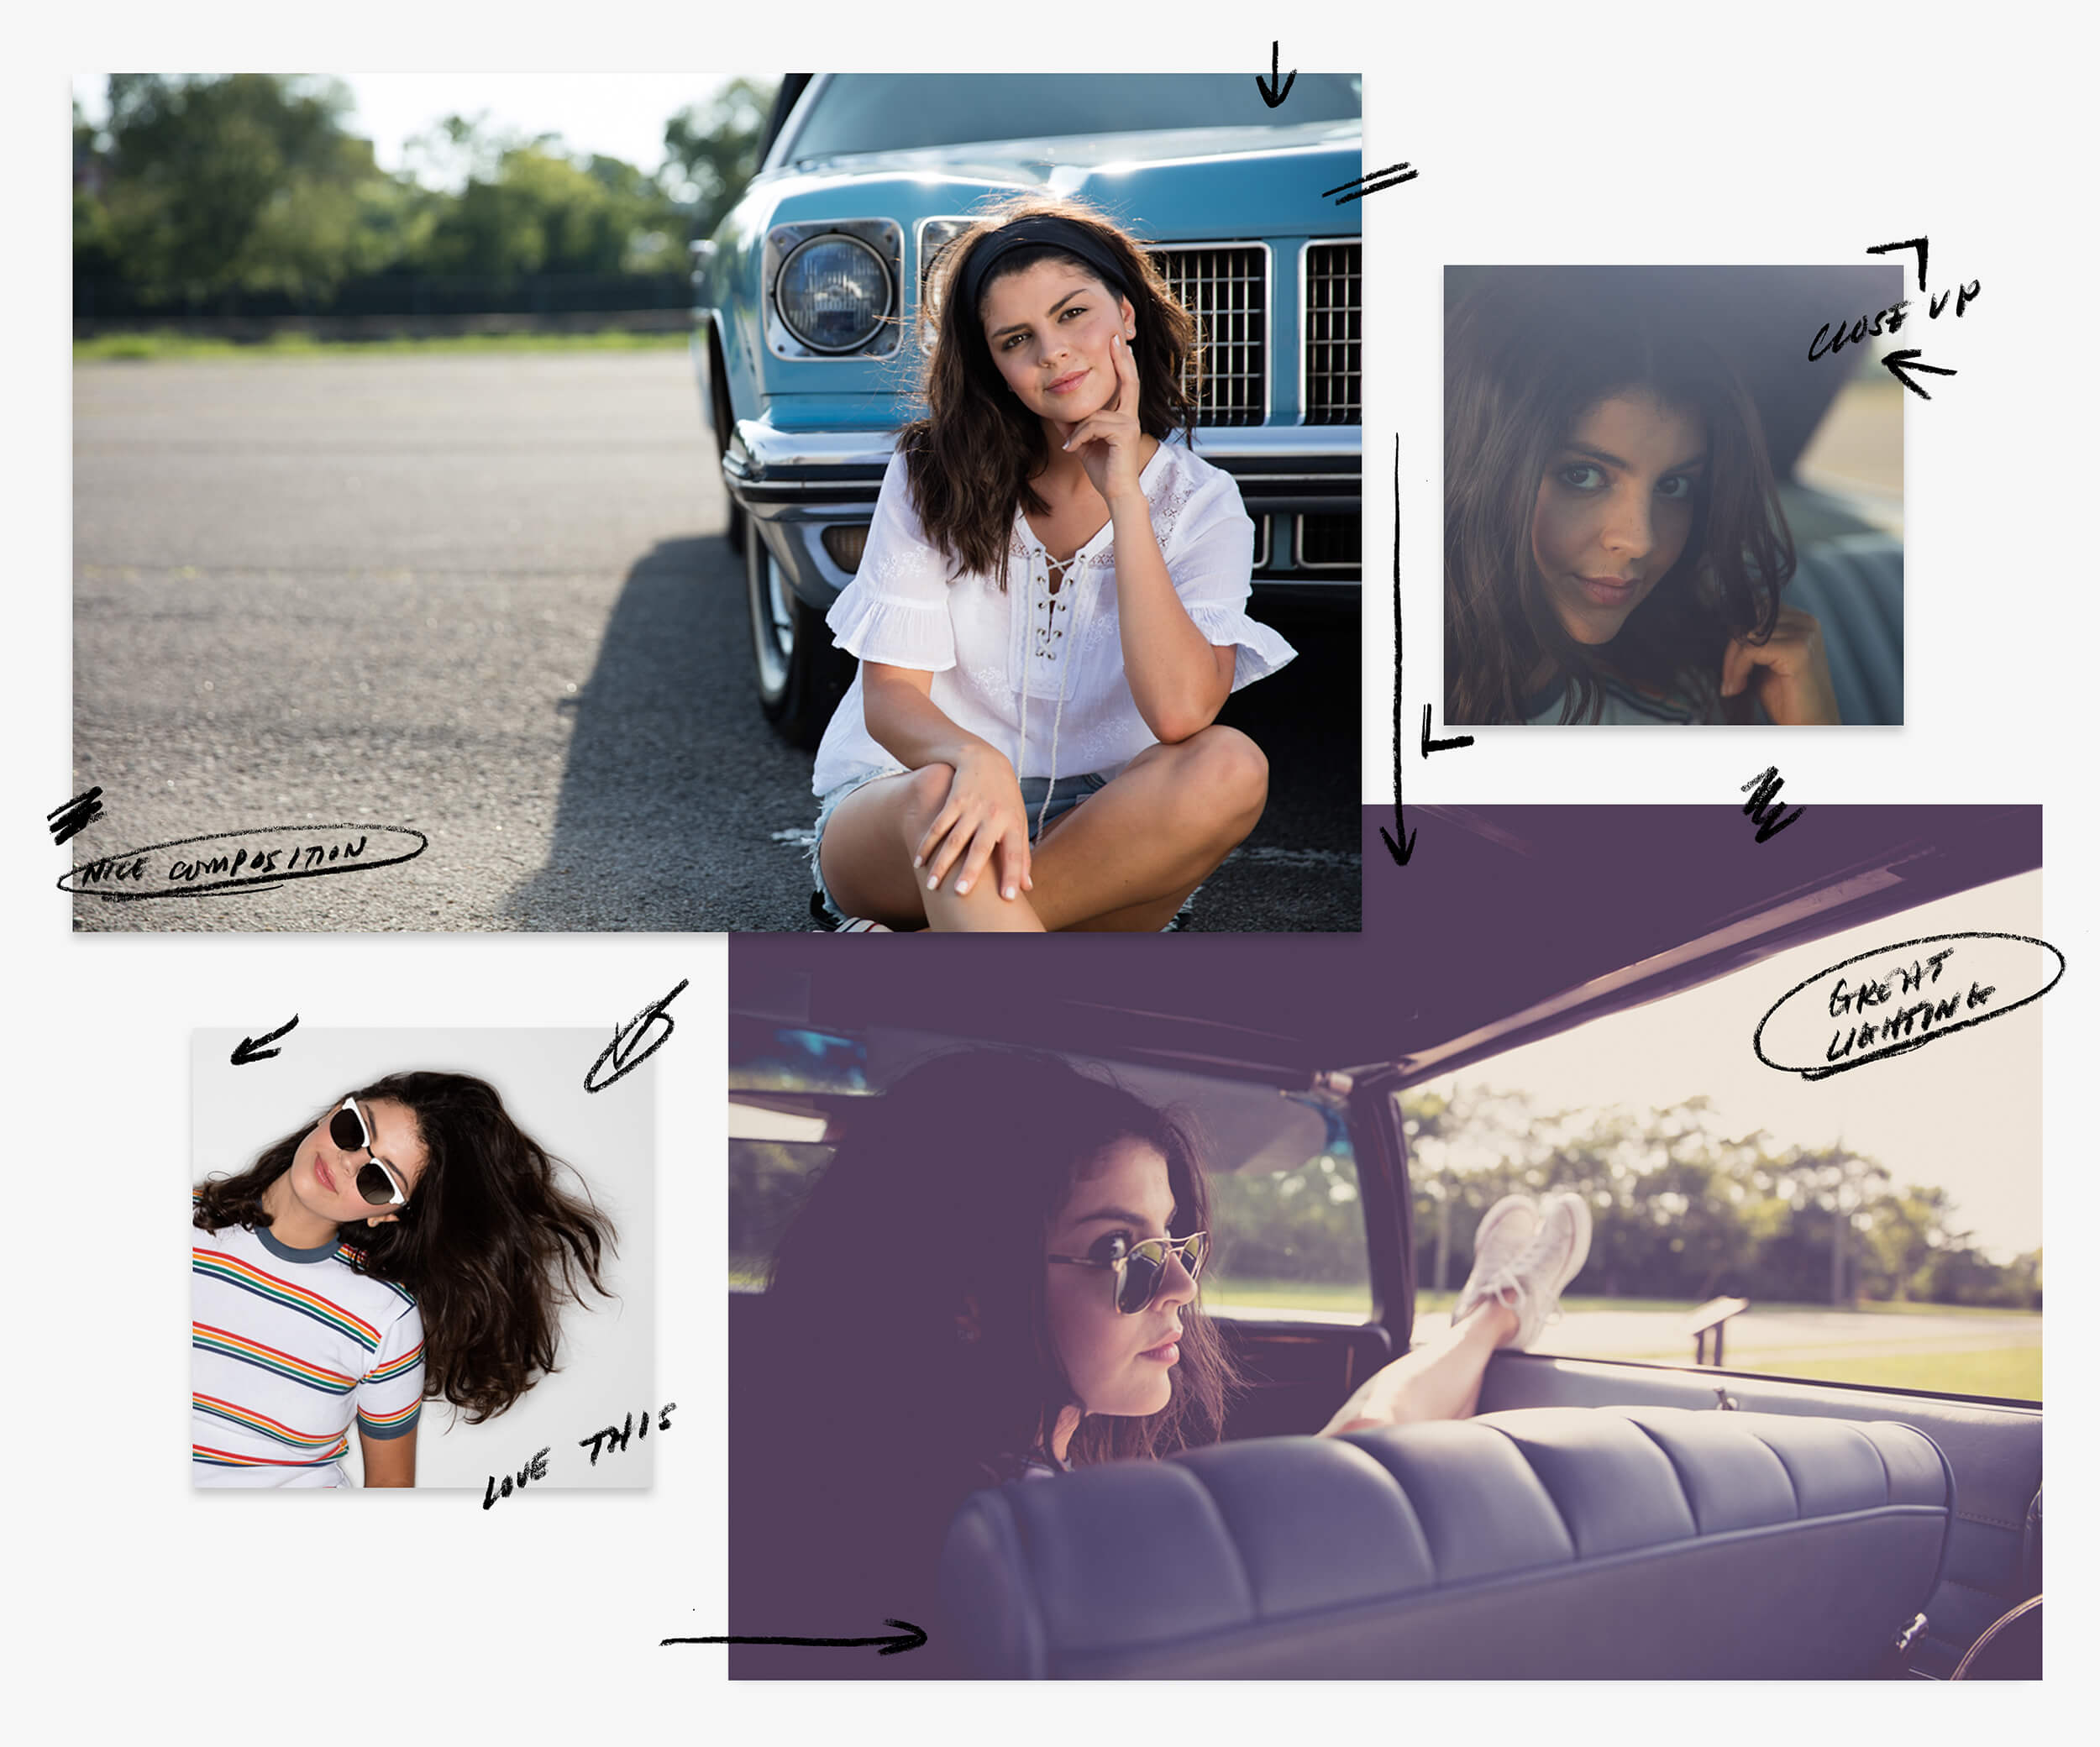 Nikki Yanofsky photoshoot, creative direction by ST8MNT, photography by Justin Nolan Key, hair and make-up by Haley Bidez, shot at The Vault, 